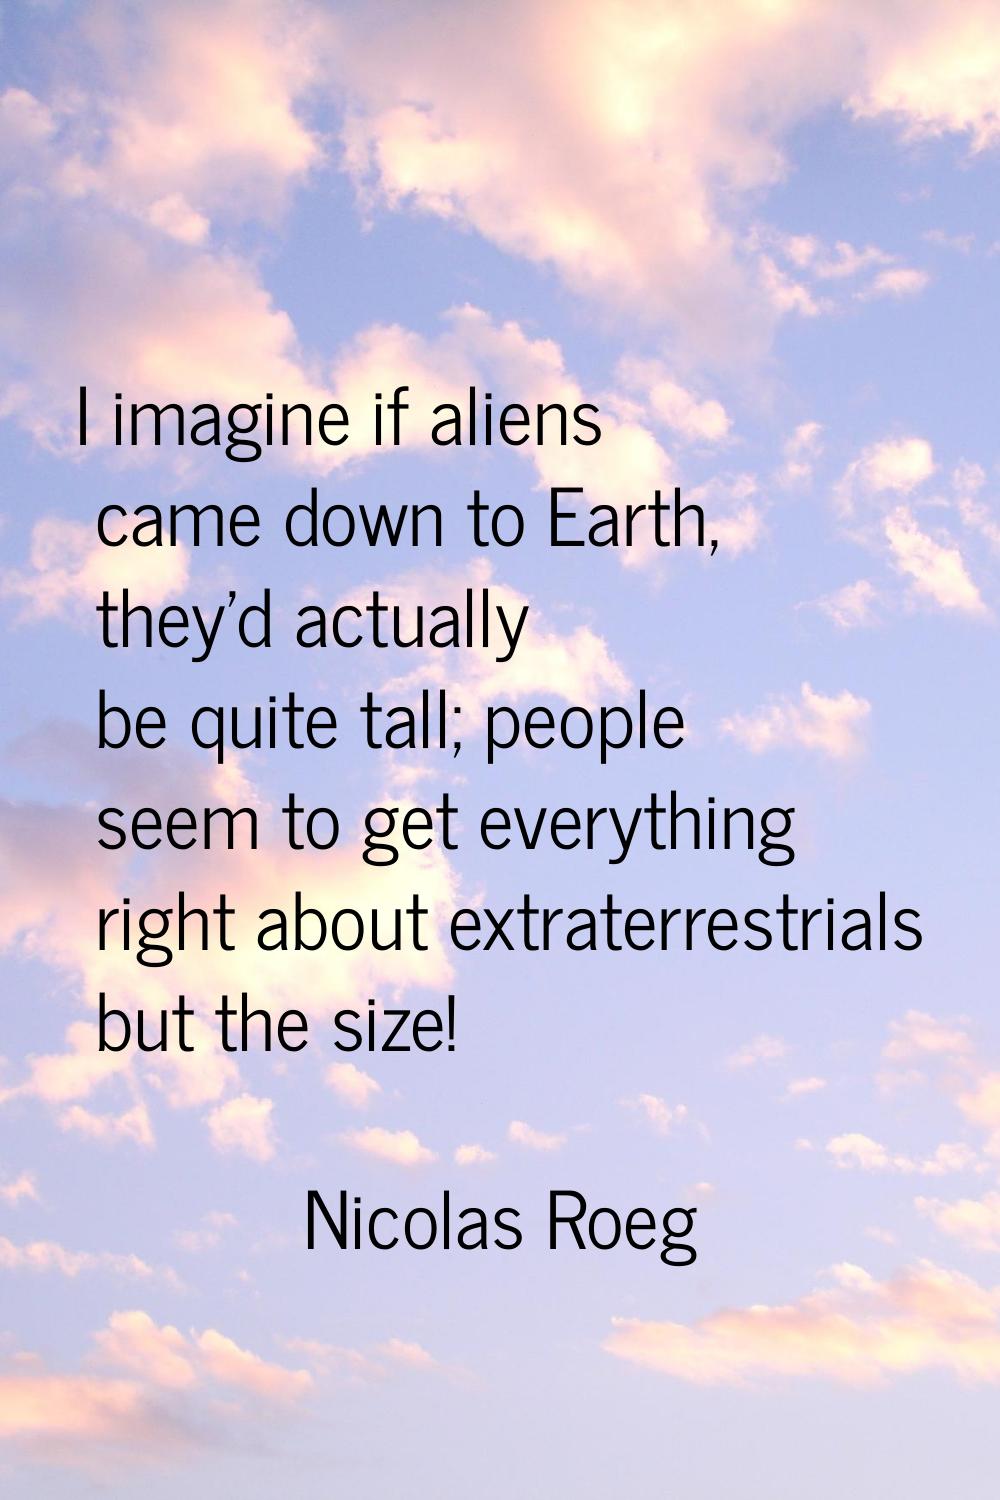 I imagine if aliens came down to Earth, they'd actually be quite tall; people seem to get everythin